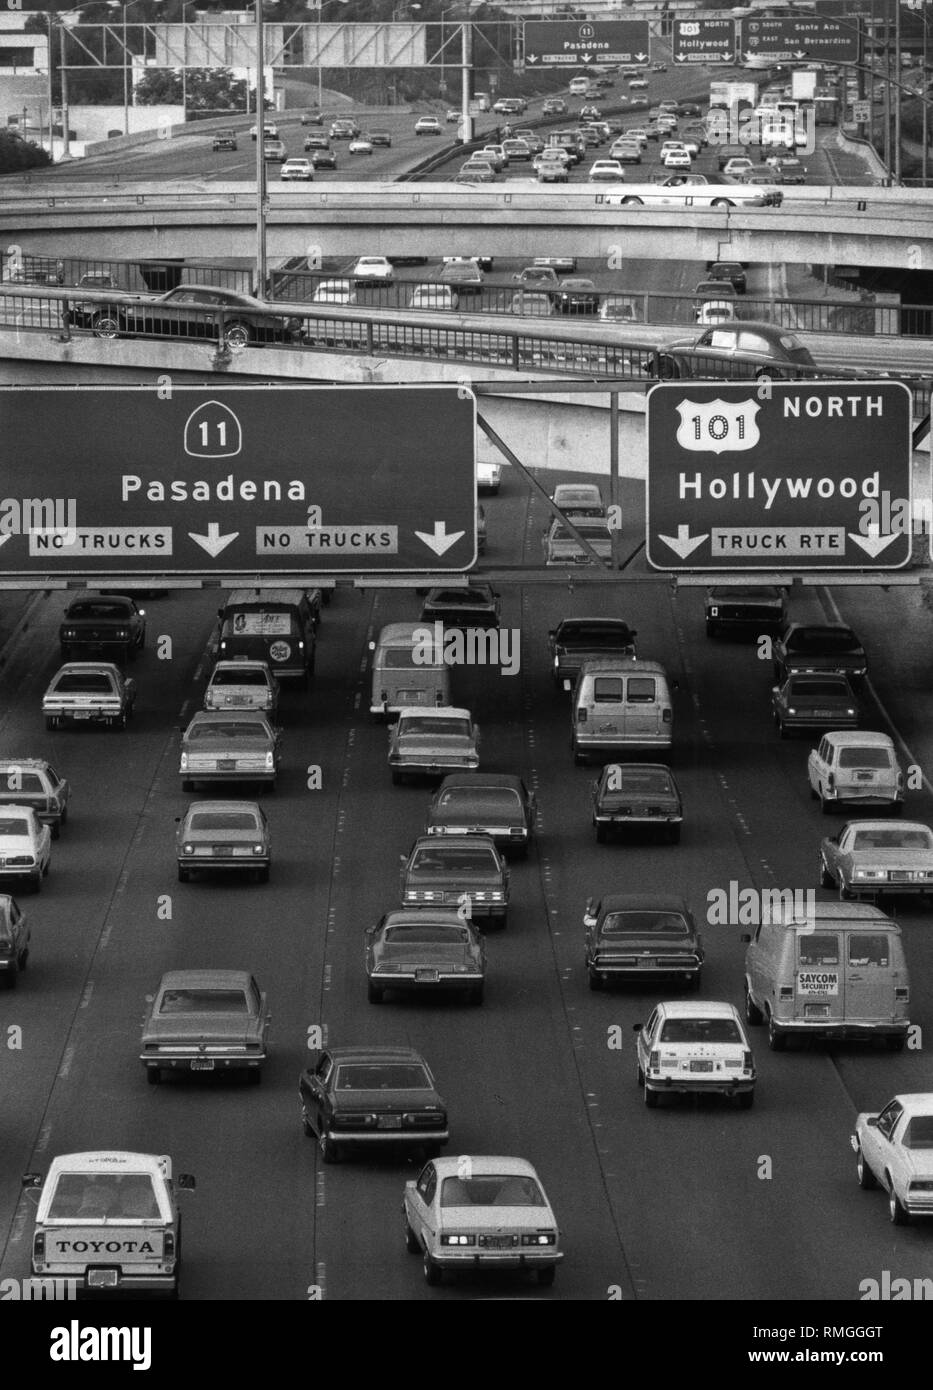 Cars on a street in Los Angeles with signposts to Pasadena and Hollywood. Stock Photo